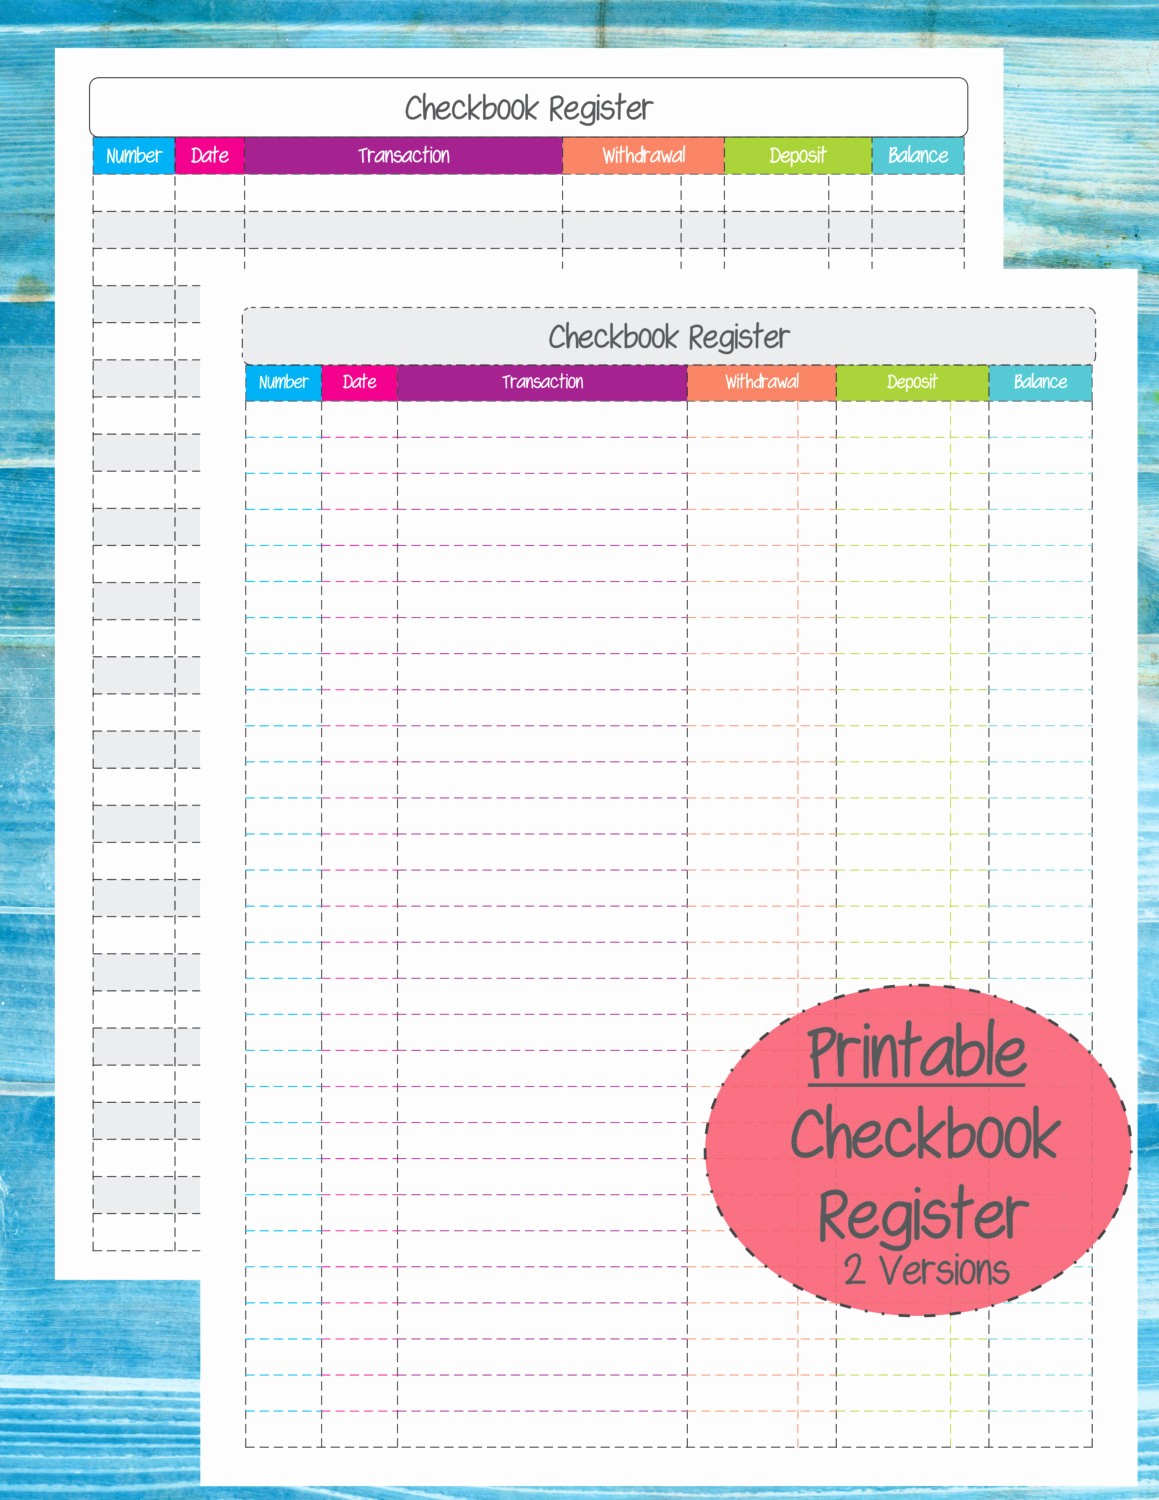 Printable Check Register Full Page New Search Results for “printable Checkbook Register Full Page